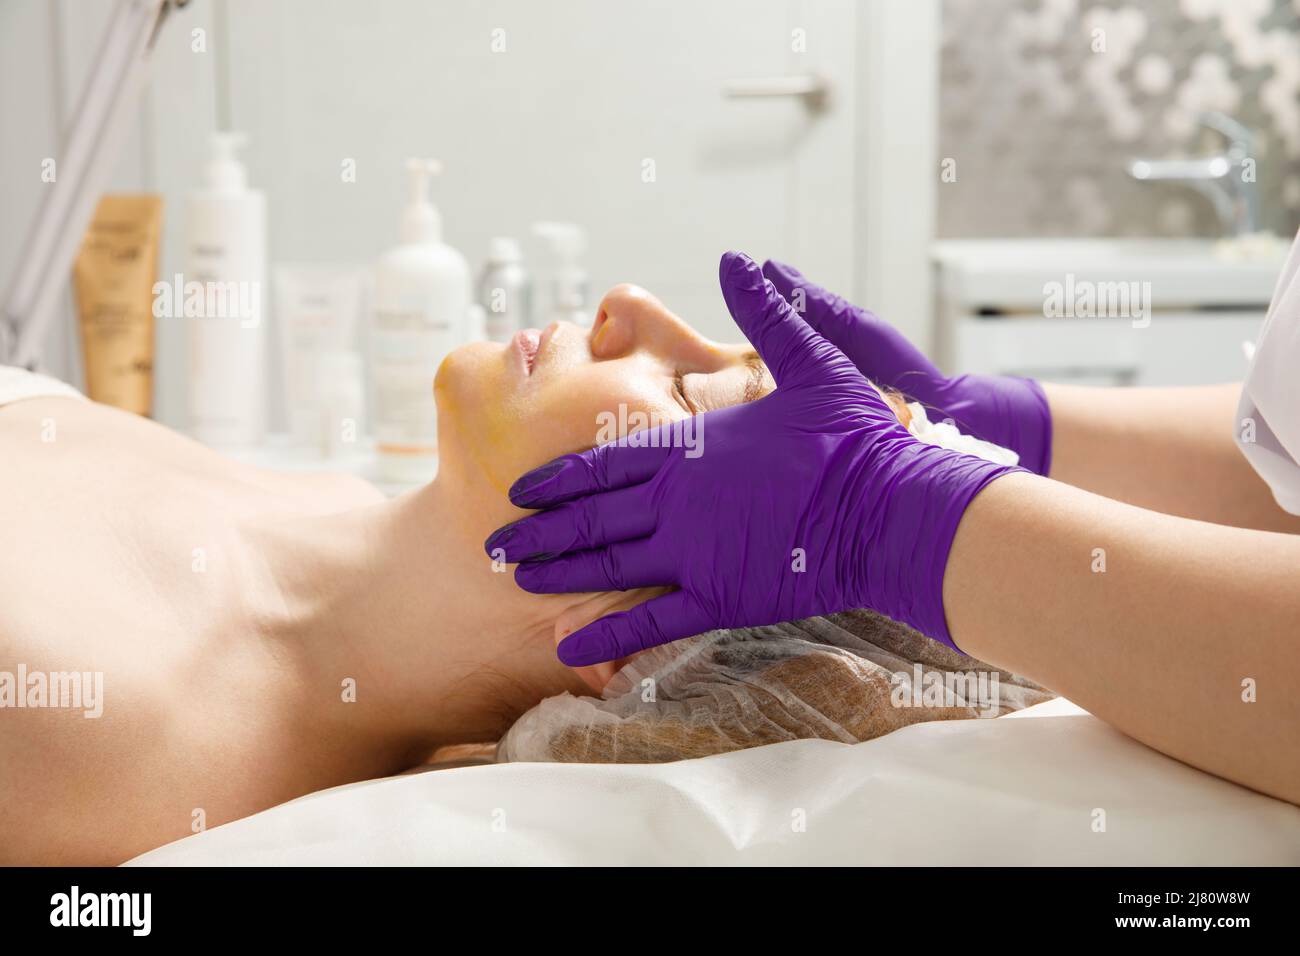 A woman gets a facial massage at a cosmetology clinic. Stock Photo